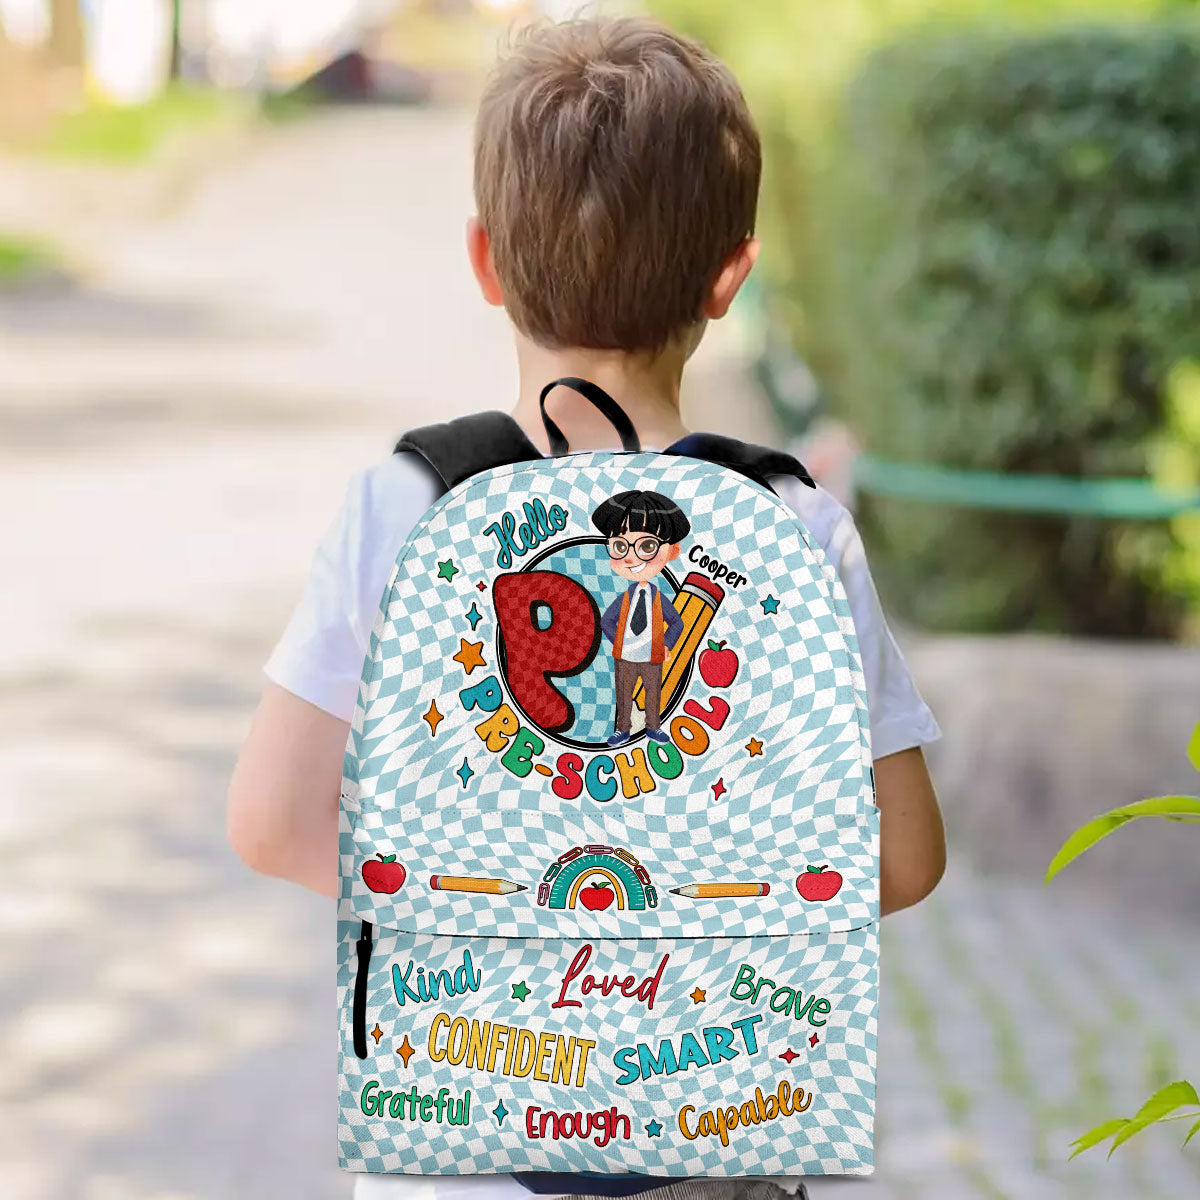 I AM - Personalized Backpack